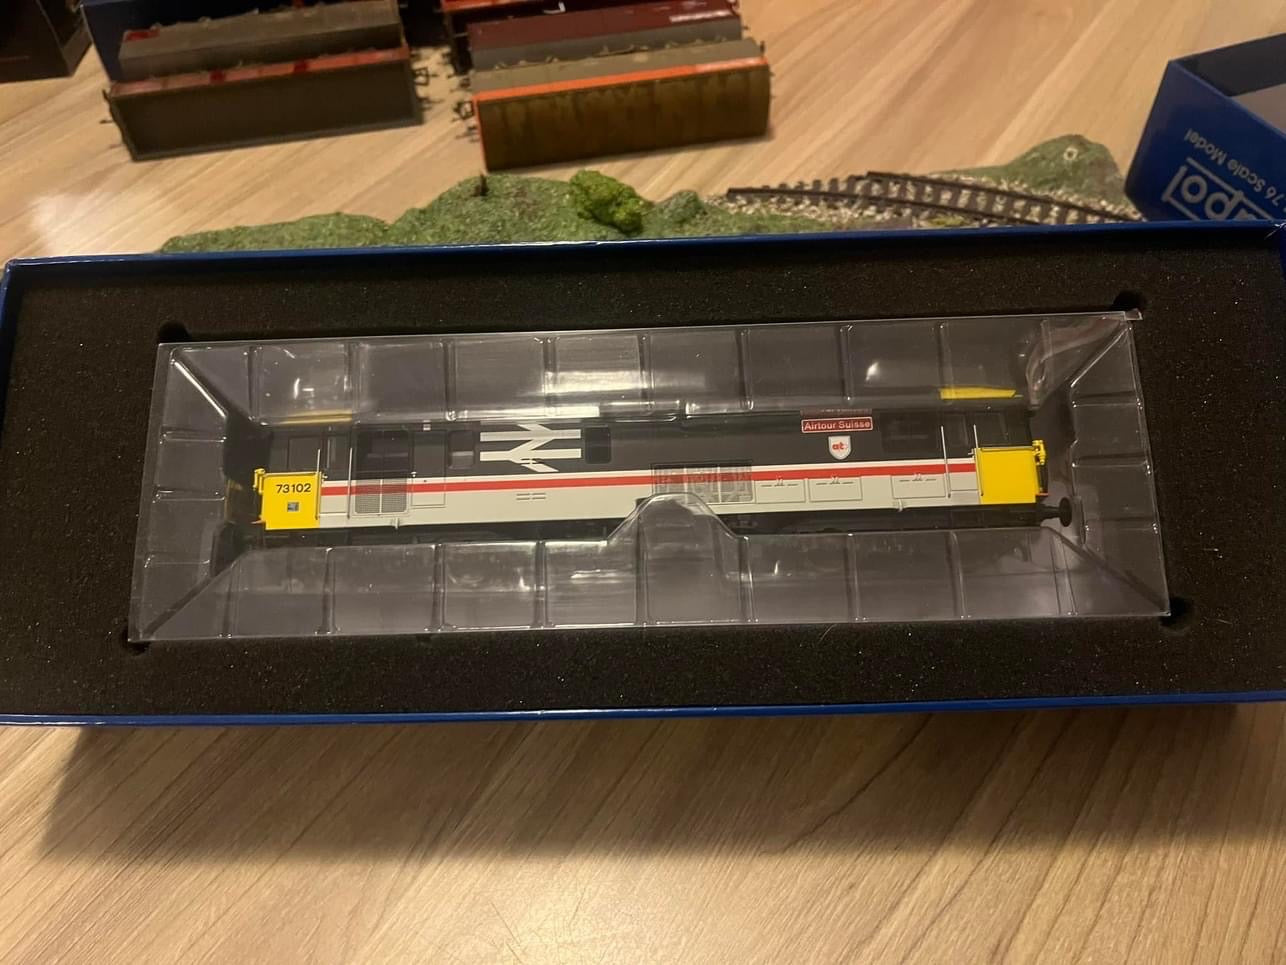 Dapol,(OO) British Railways, Class 73/1 Electro Diesel, No 73102 “Airtour Suisse” in British Rail Intercity executive livery. ￼DCC Ready, Brand new model.